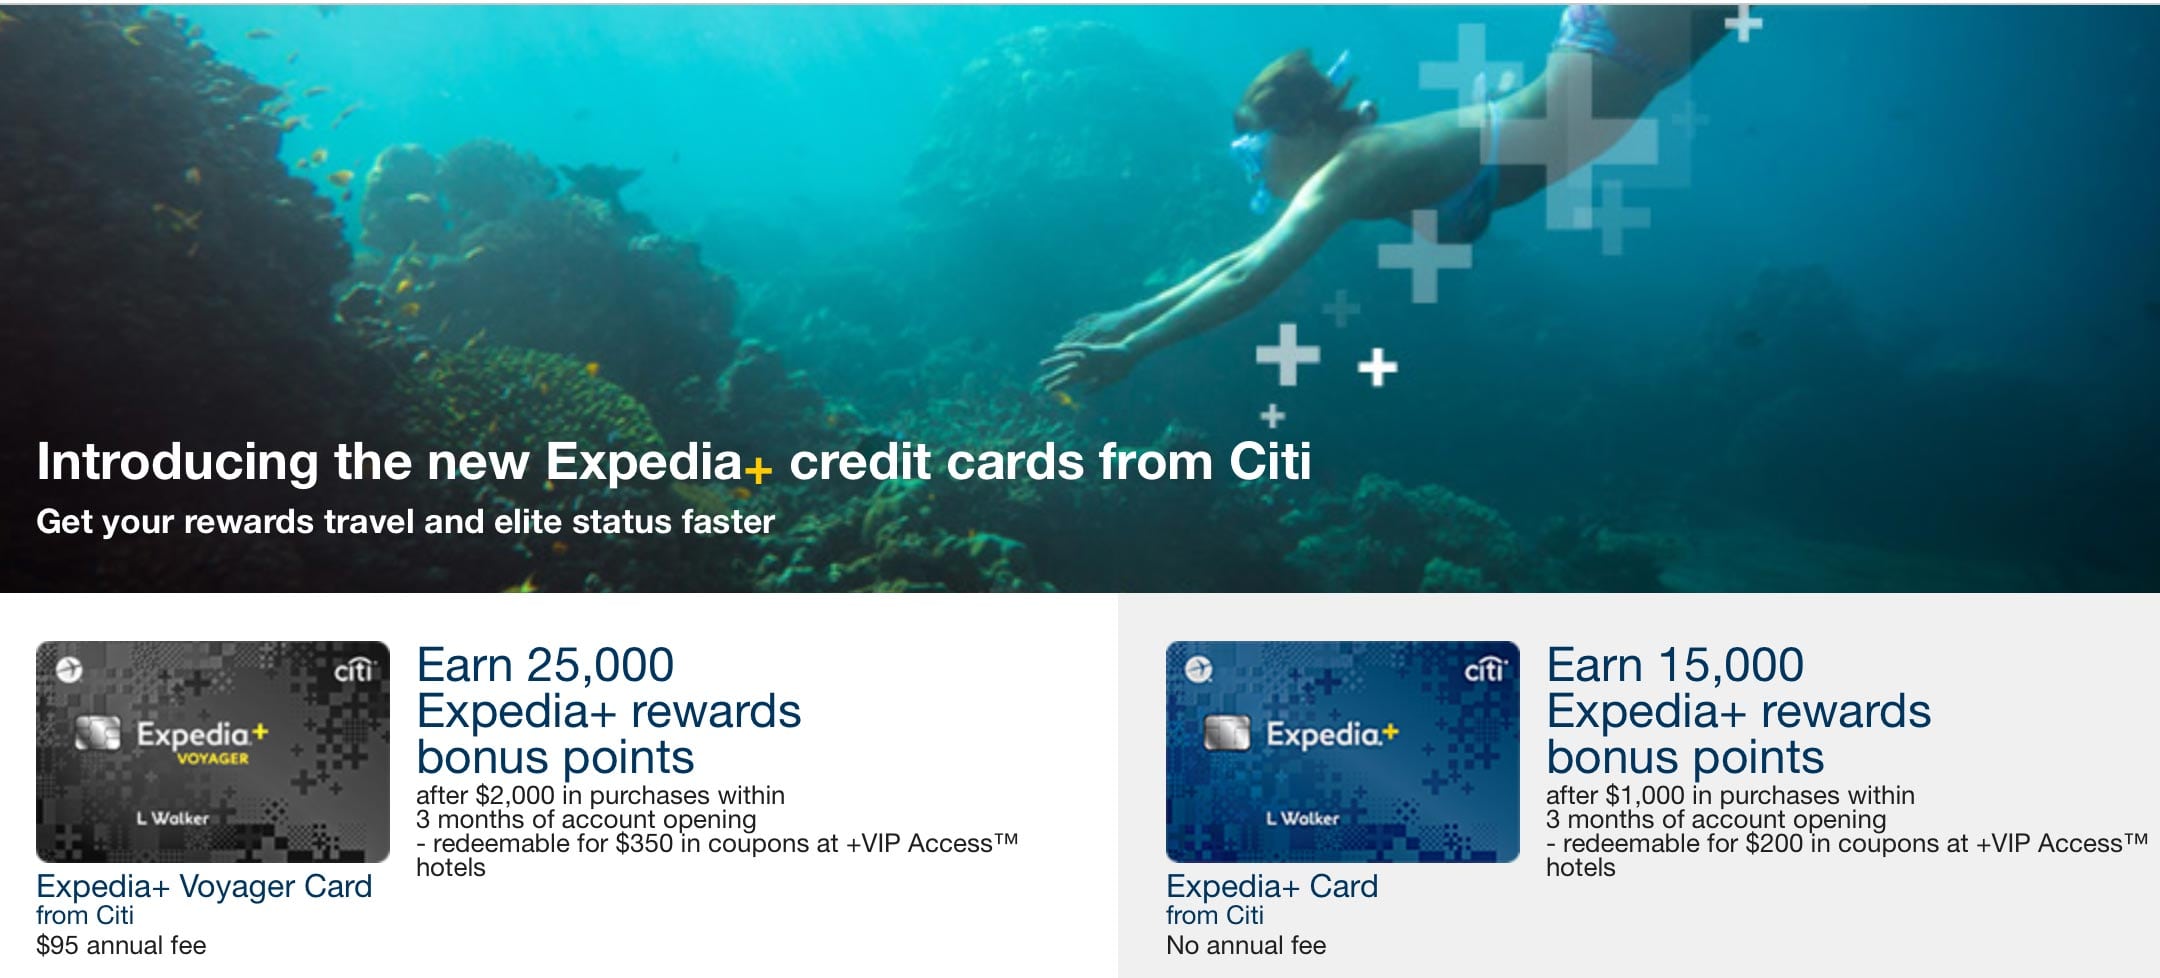 Expedia is expanding its loyalty program with new credit cards from Citibank. 